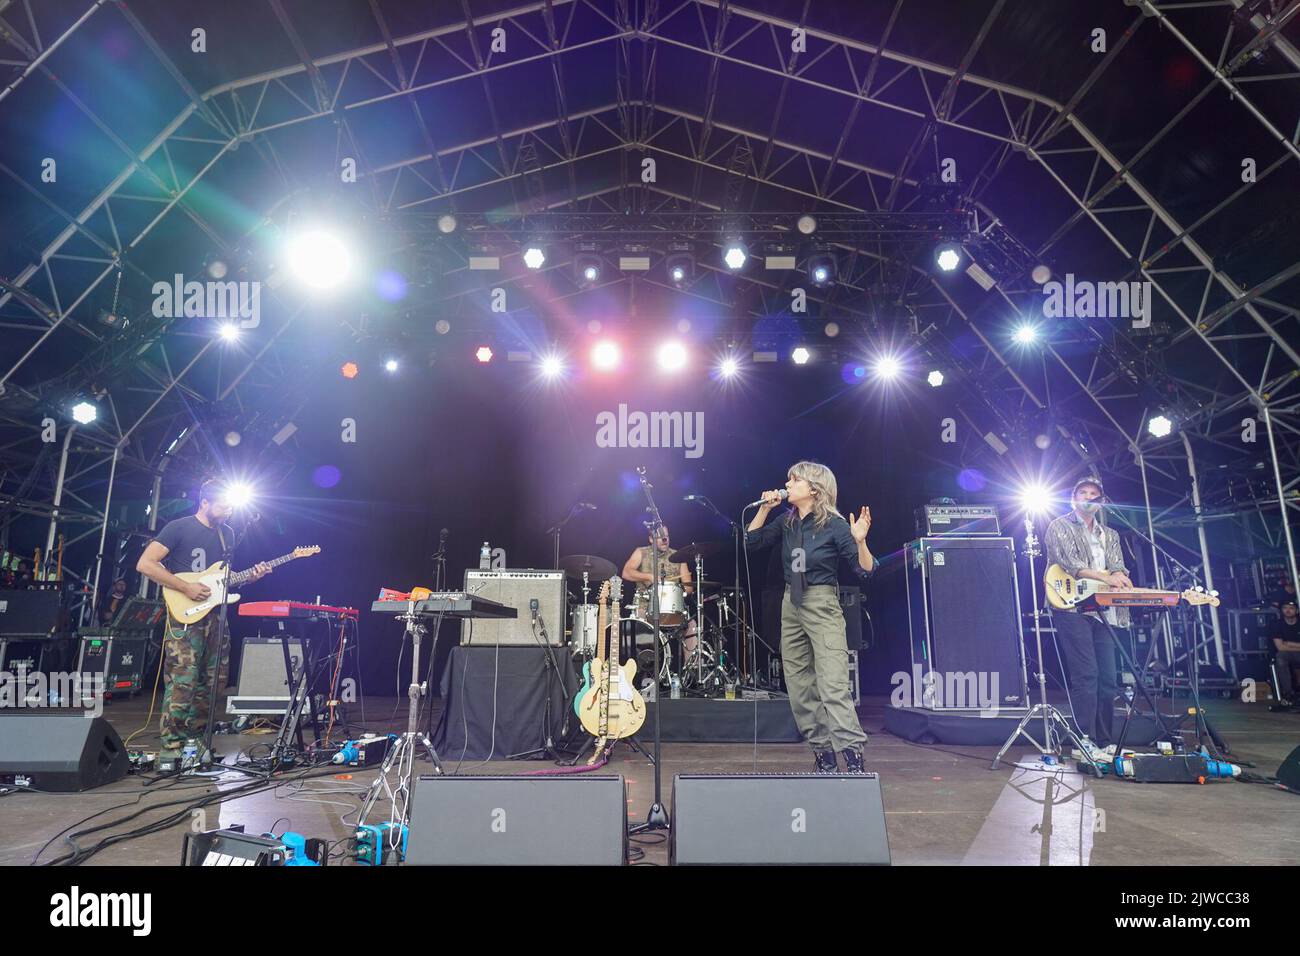 Dorset, UK. Sunday, 4 September, 2022. performing at the 2022 End of the Road Festival. Photo: Richard Gray/Alamy Stock Photo